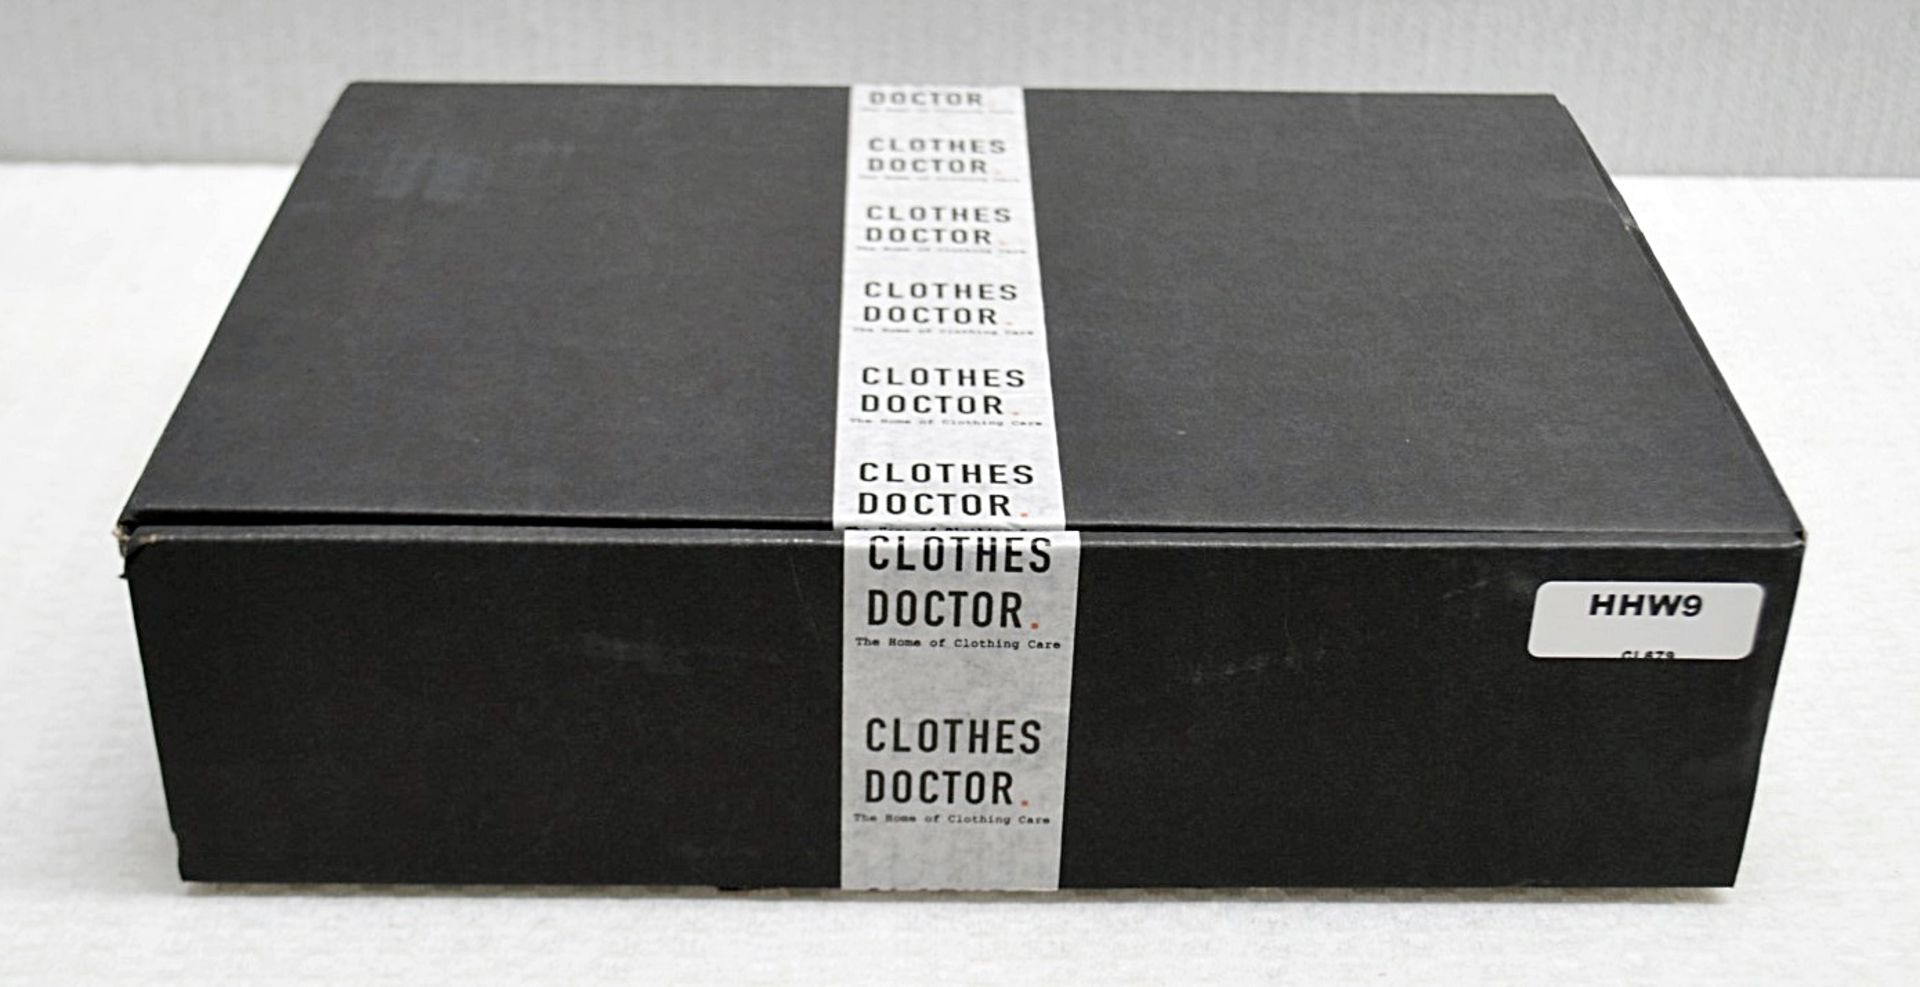 1 x Clothes Doctor Clothing Care Set - Ref: HHW9/JUL21 - CL011 - Location: Altrincham WA14 More - Image 4 of 13